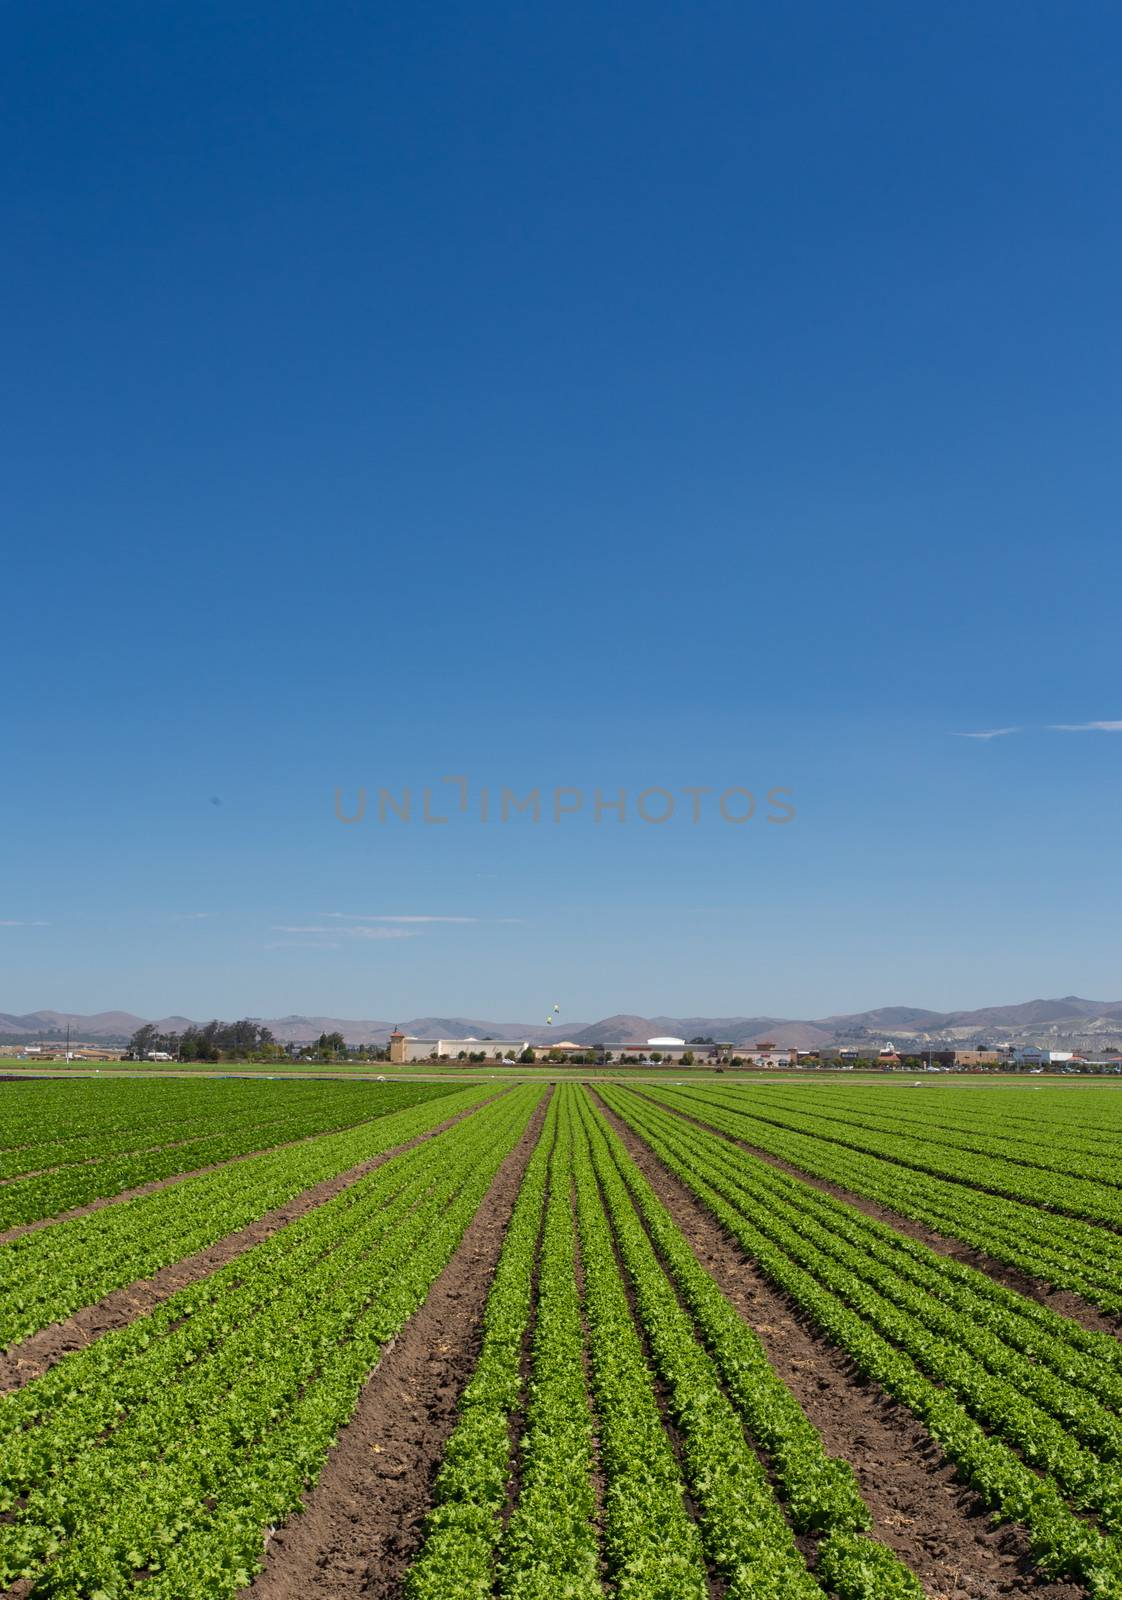 Panoramic Vertical  View of Newly Planted Lettuce Field in Salinas, California